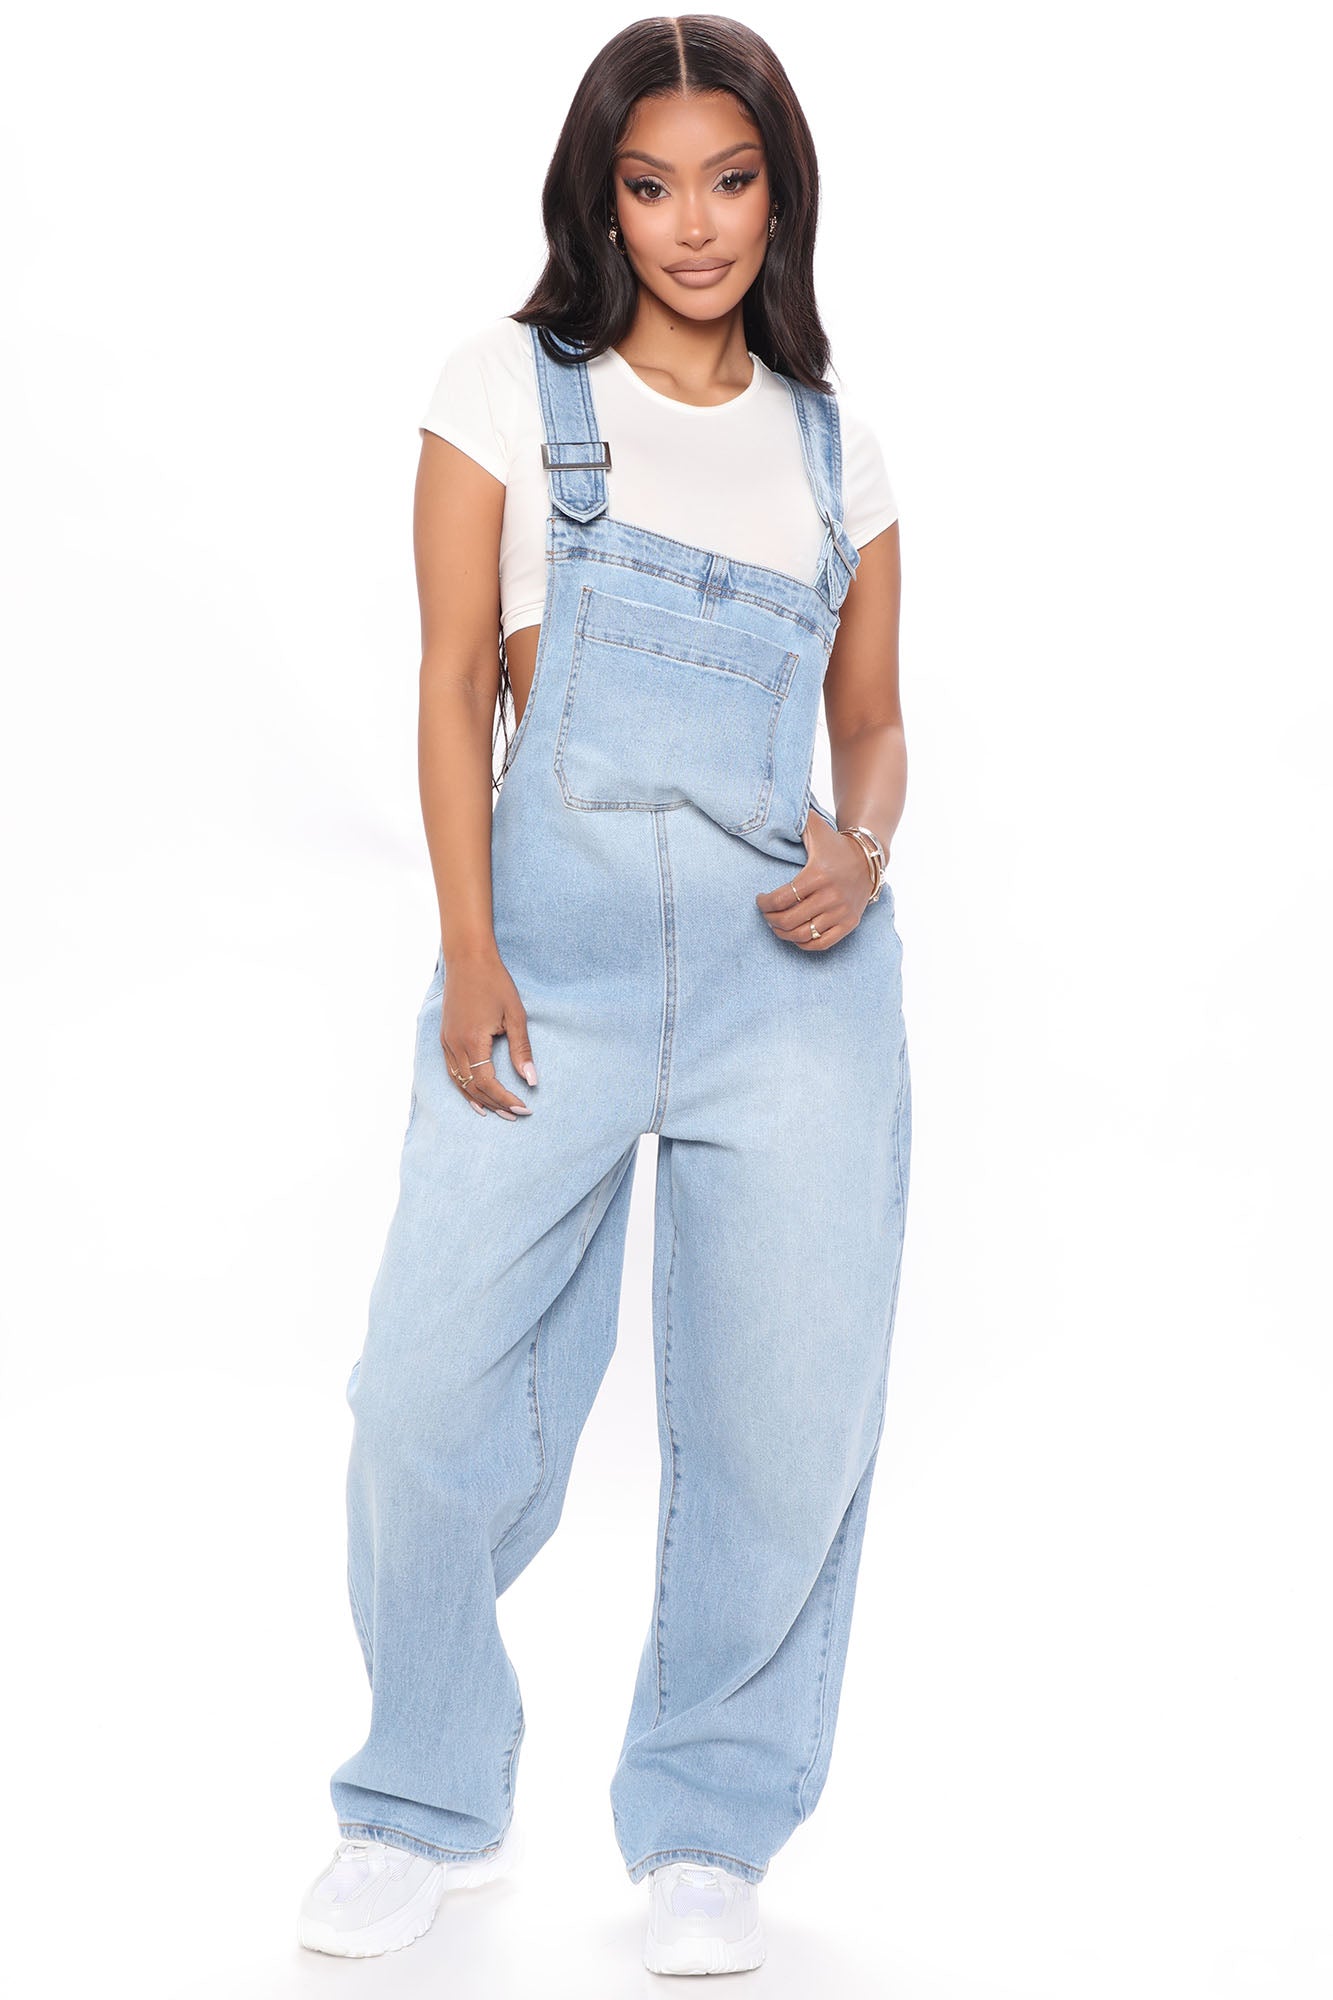 Wash Clothing Company Womens denim dungarees regular fit overalls festival  fashion retro jeans PRUE